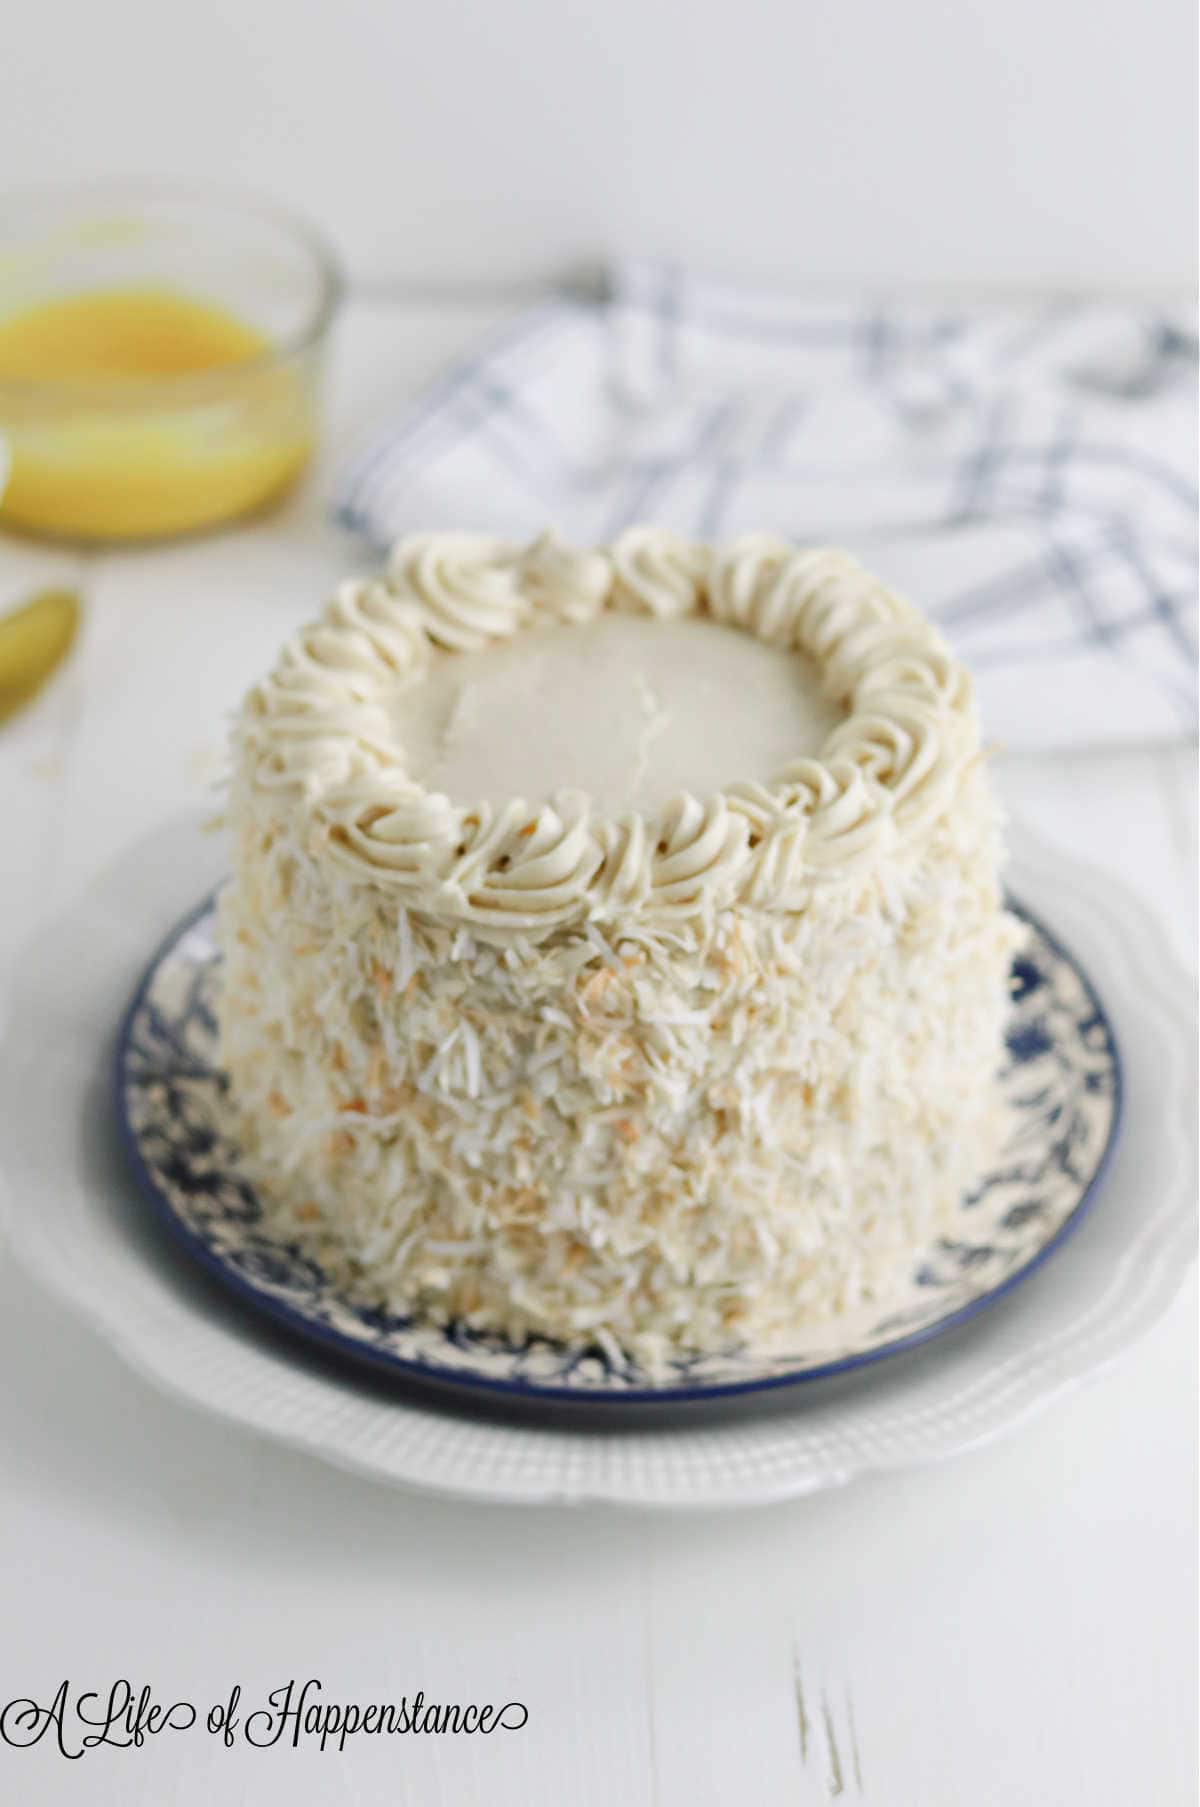 The almond flour coconut cake on a blue and white plate.